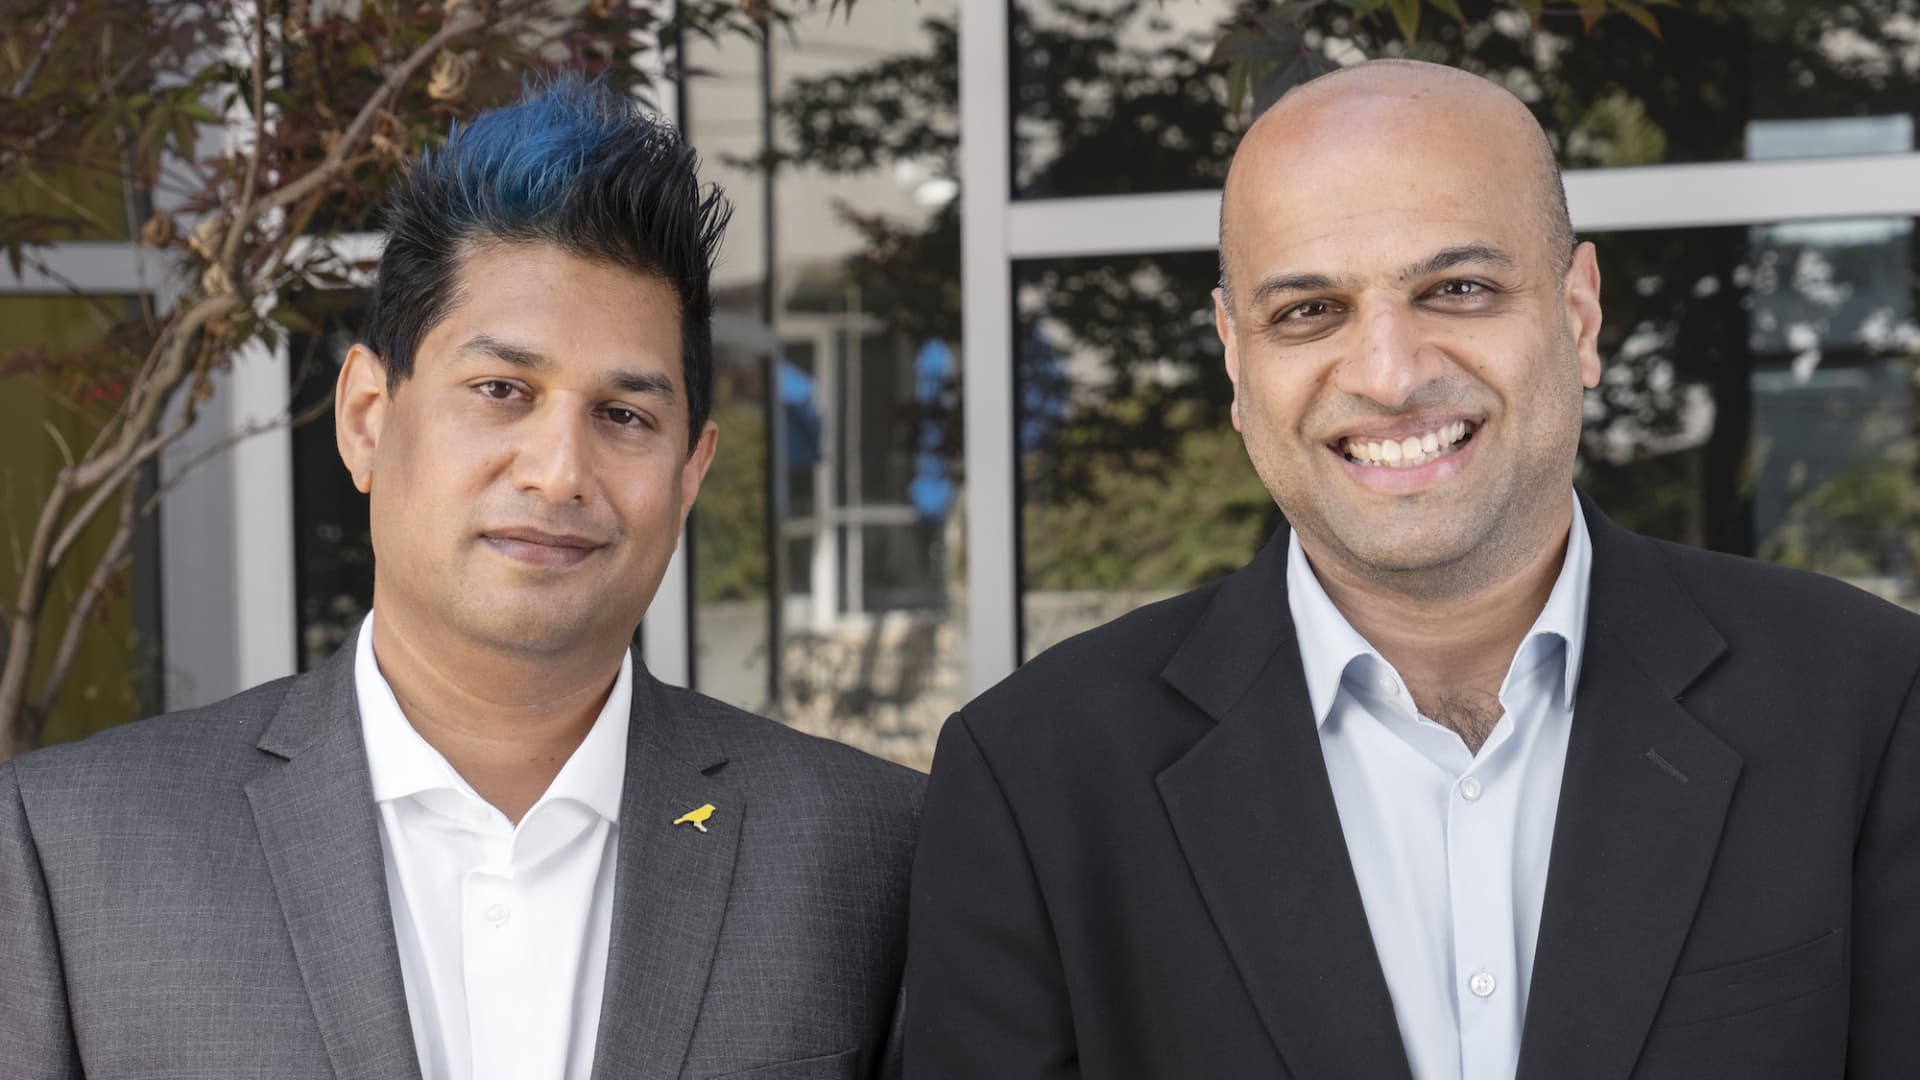 Nautilus Biotechnology's founders, Parag Mallick and Sujal Patel.